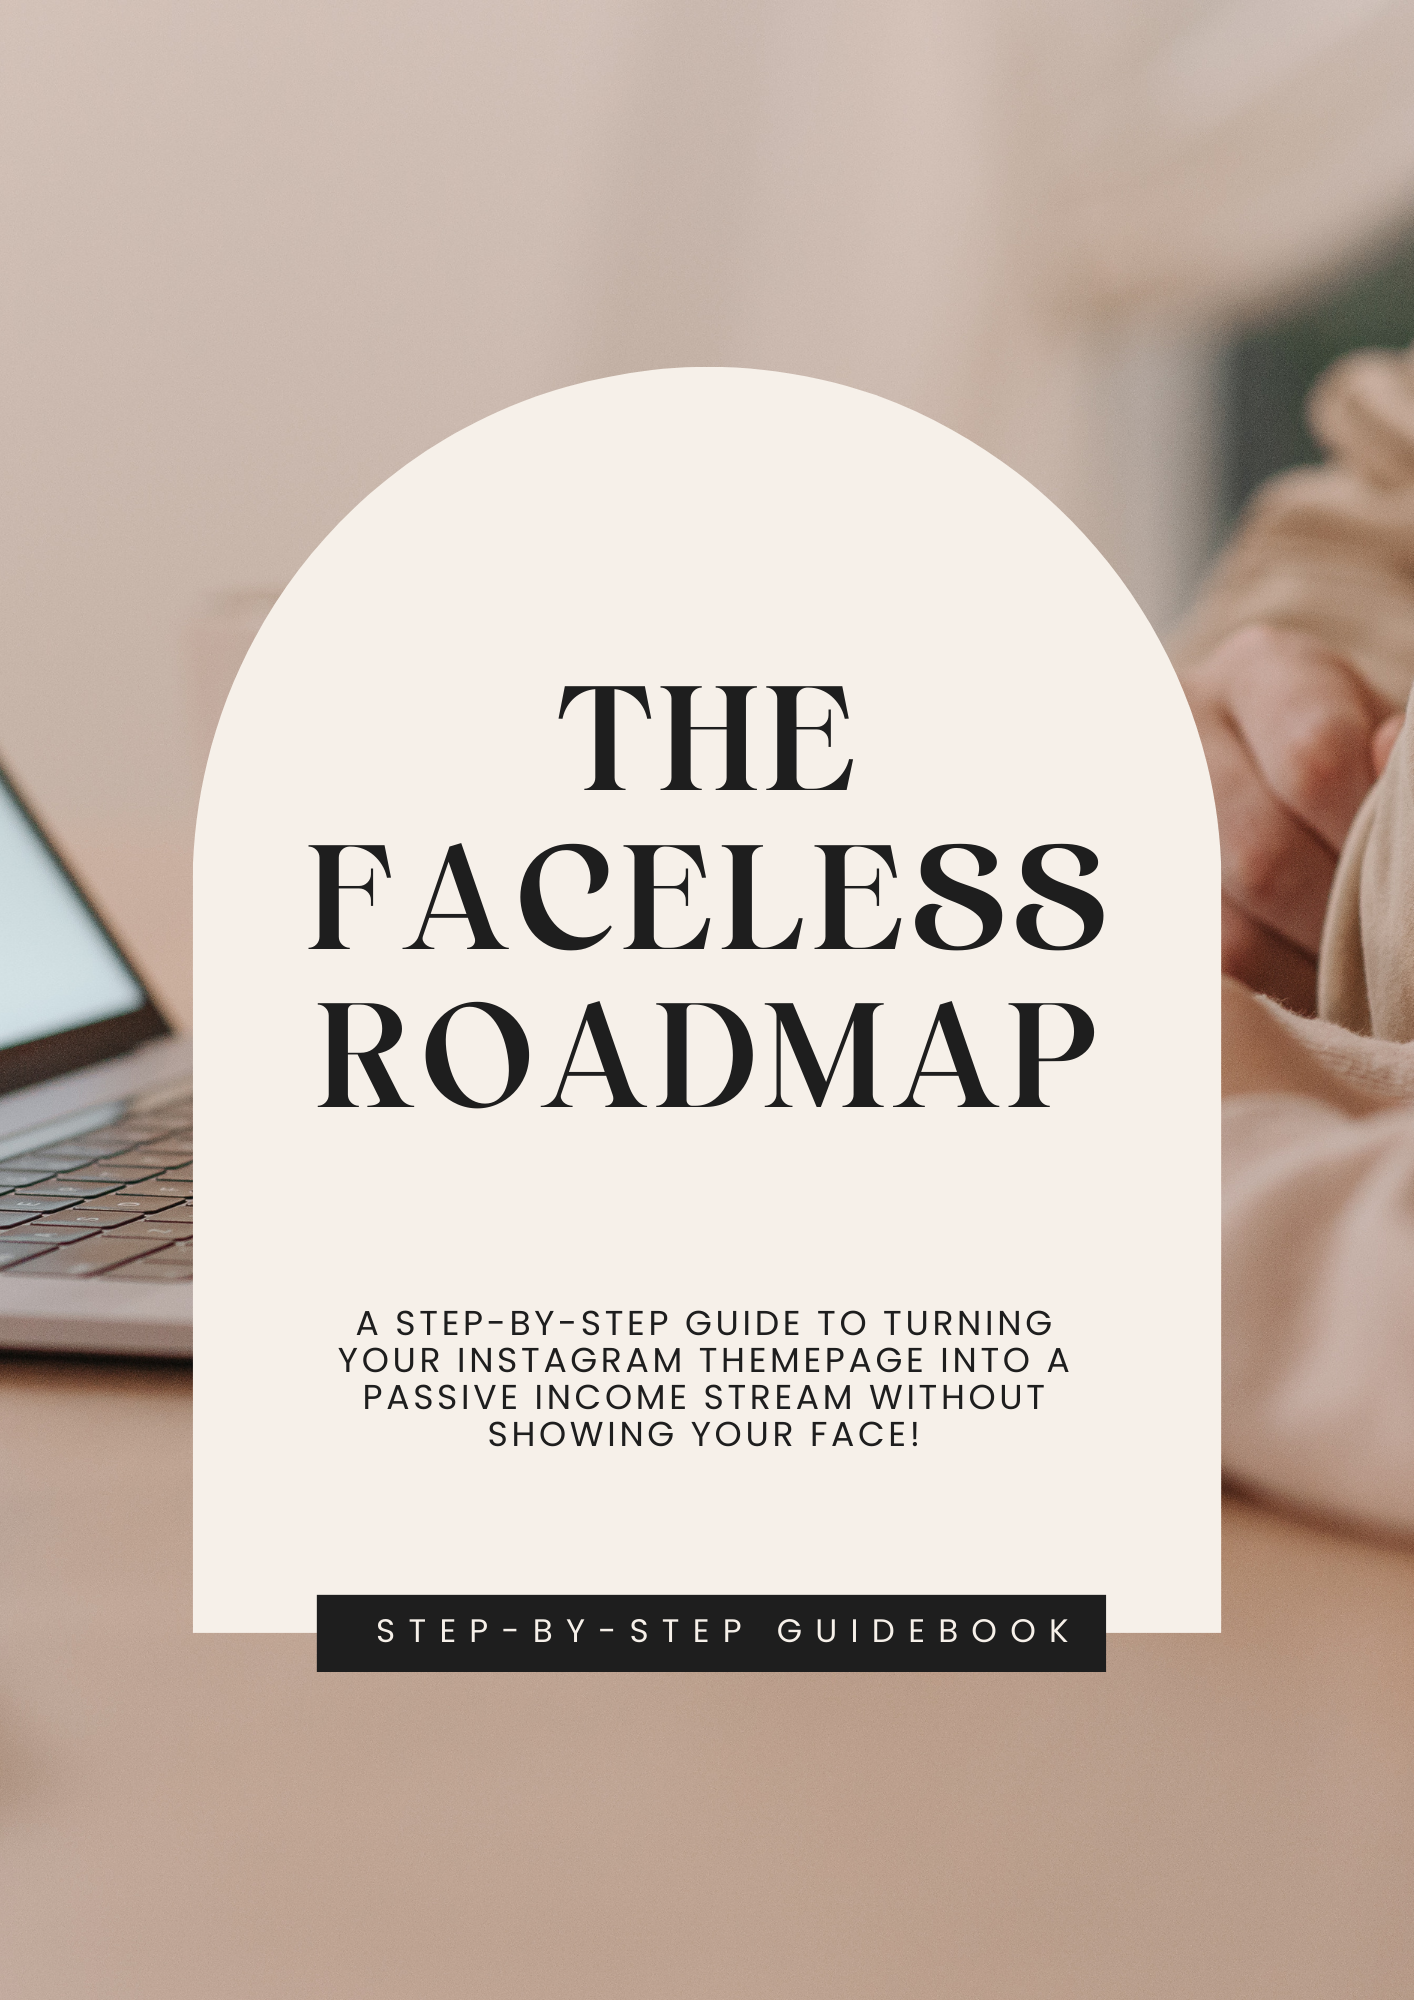 Free eBook: The Faceless Roadmap (Step-by-Step Guide to Faceless Digital Marketing on Instagram)